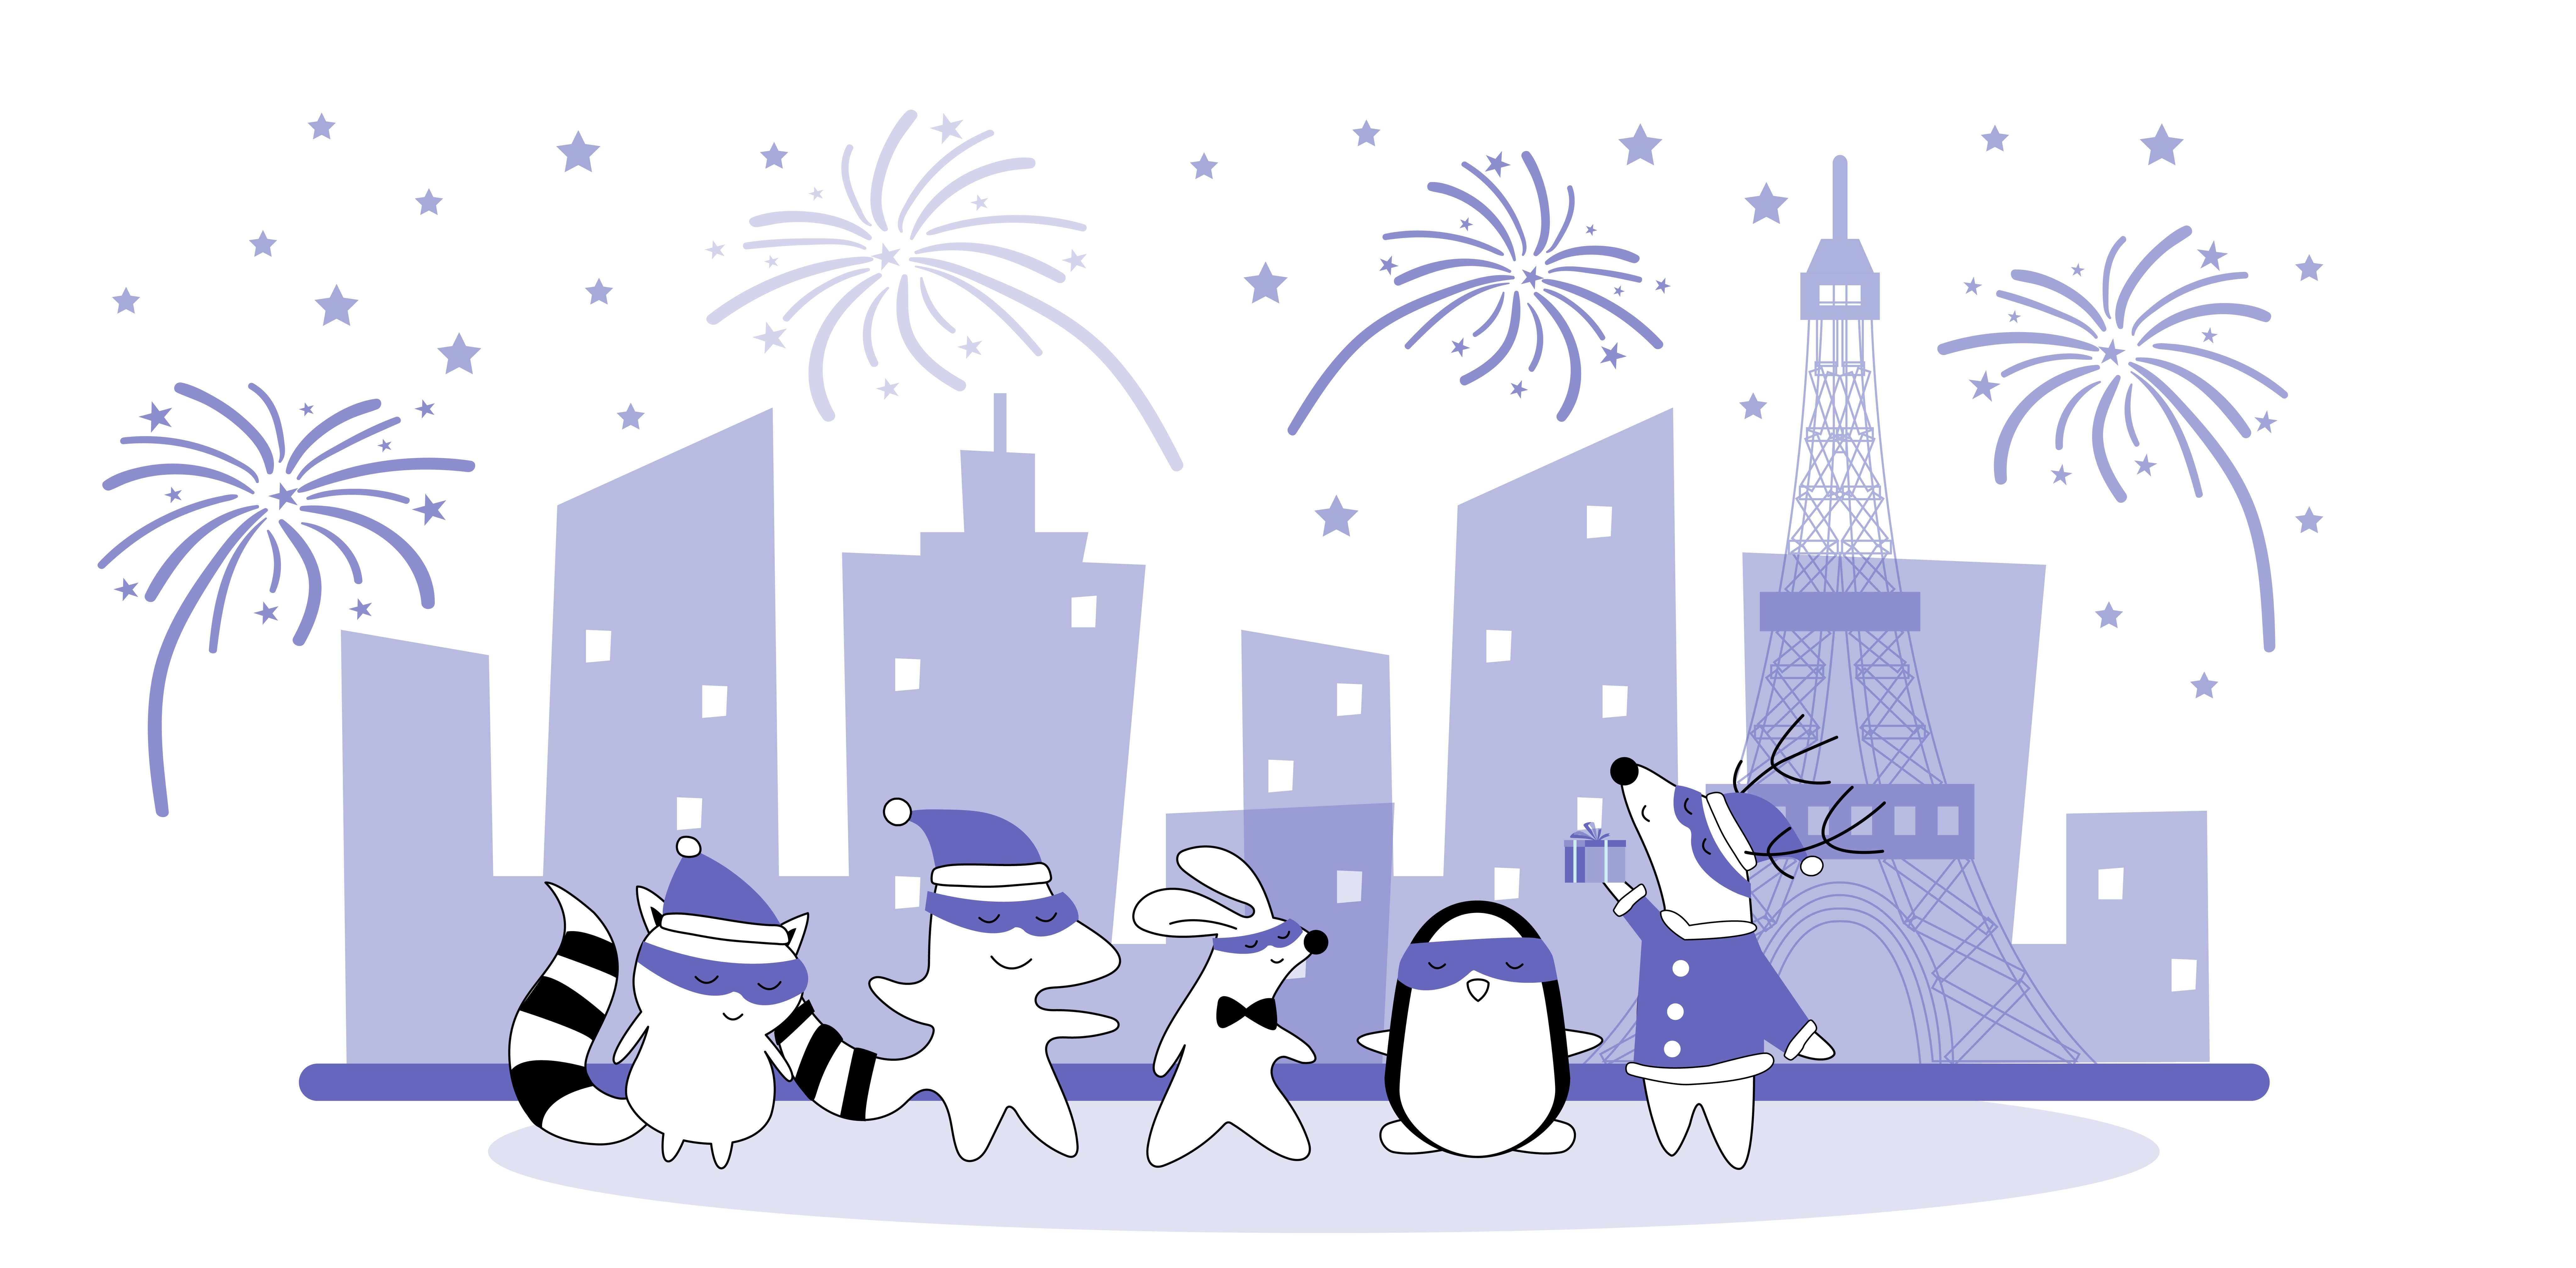 Pocky, Benji, Iggy, and Soren are celebrating the New Year with fireworks behind them.